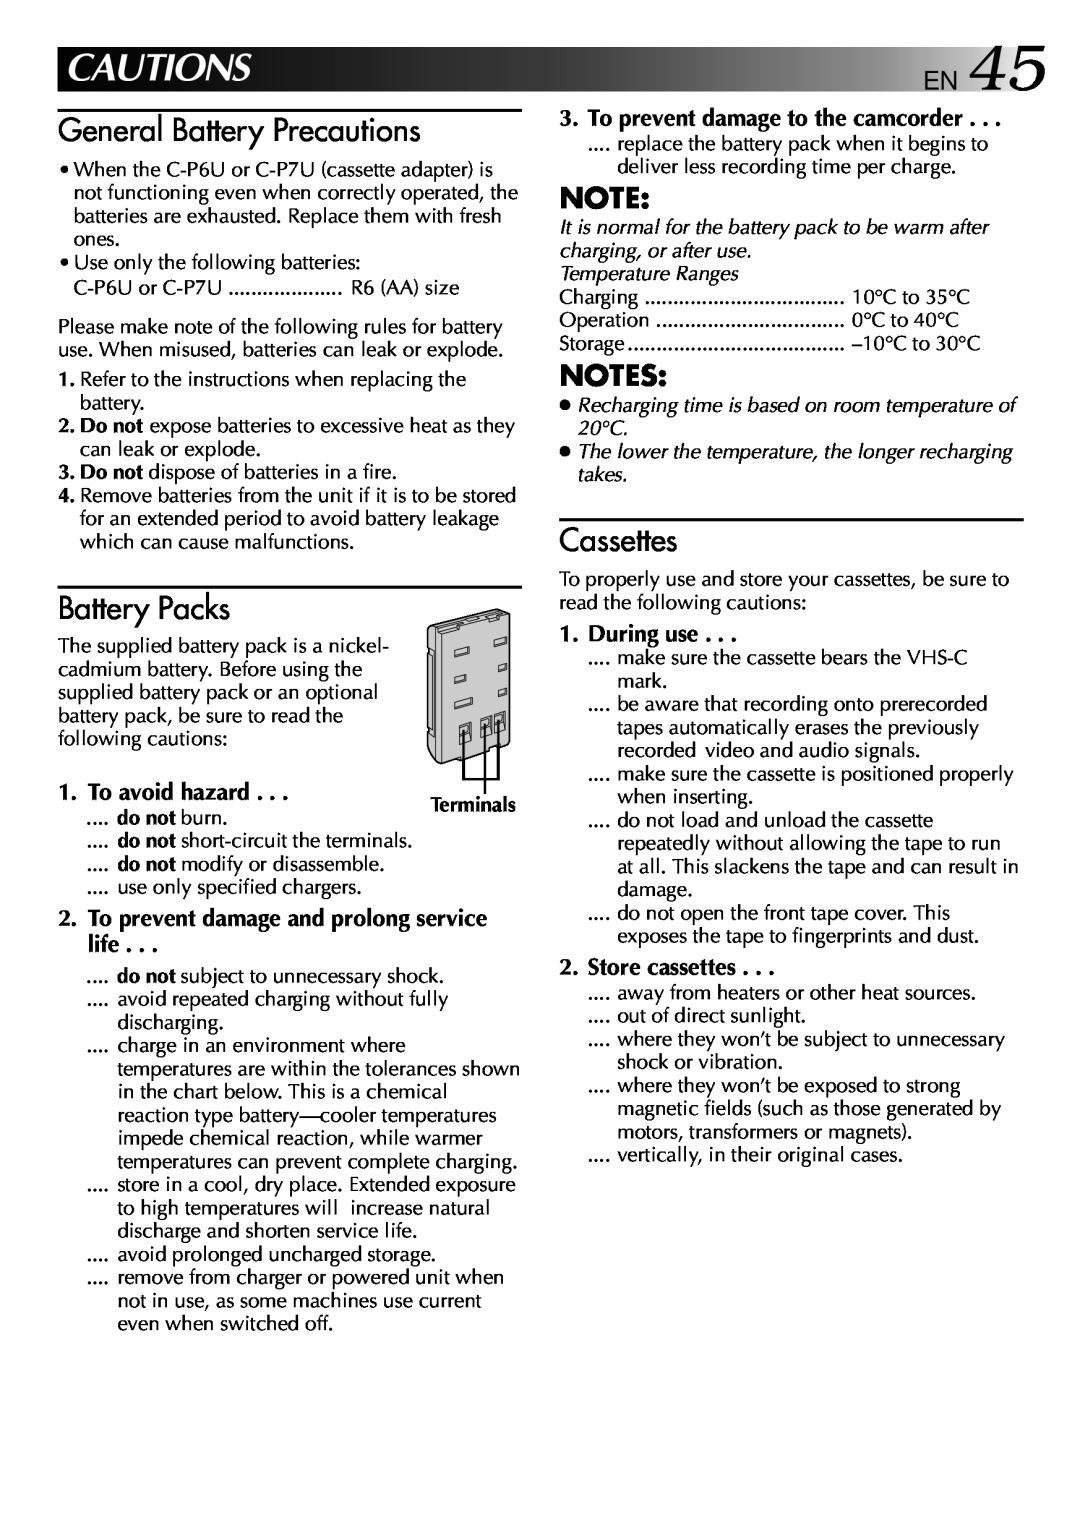 JVC LYT0002-082A manual Cautions, General Battery Precautions, Battery Packs, Cassettes, To avoid hazard, During use 